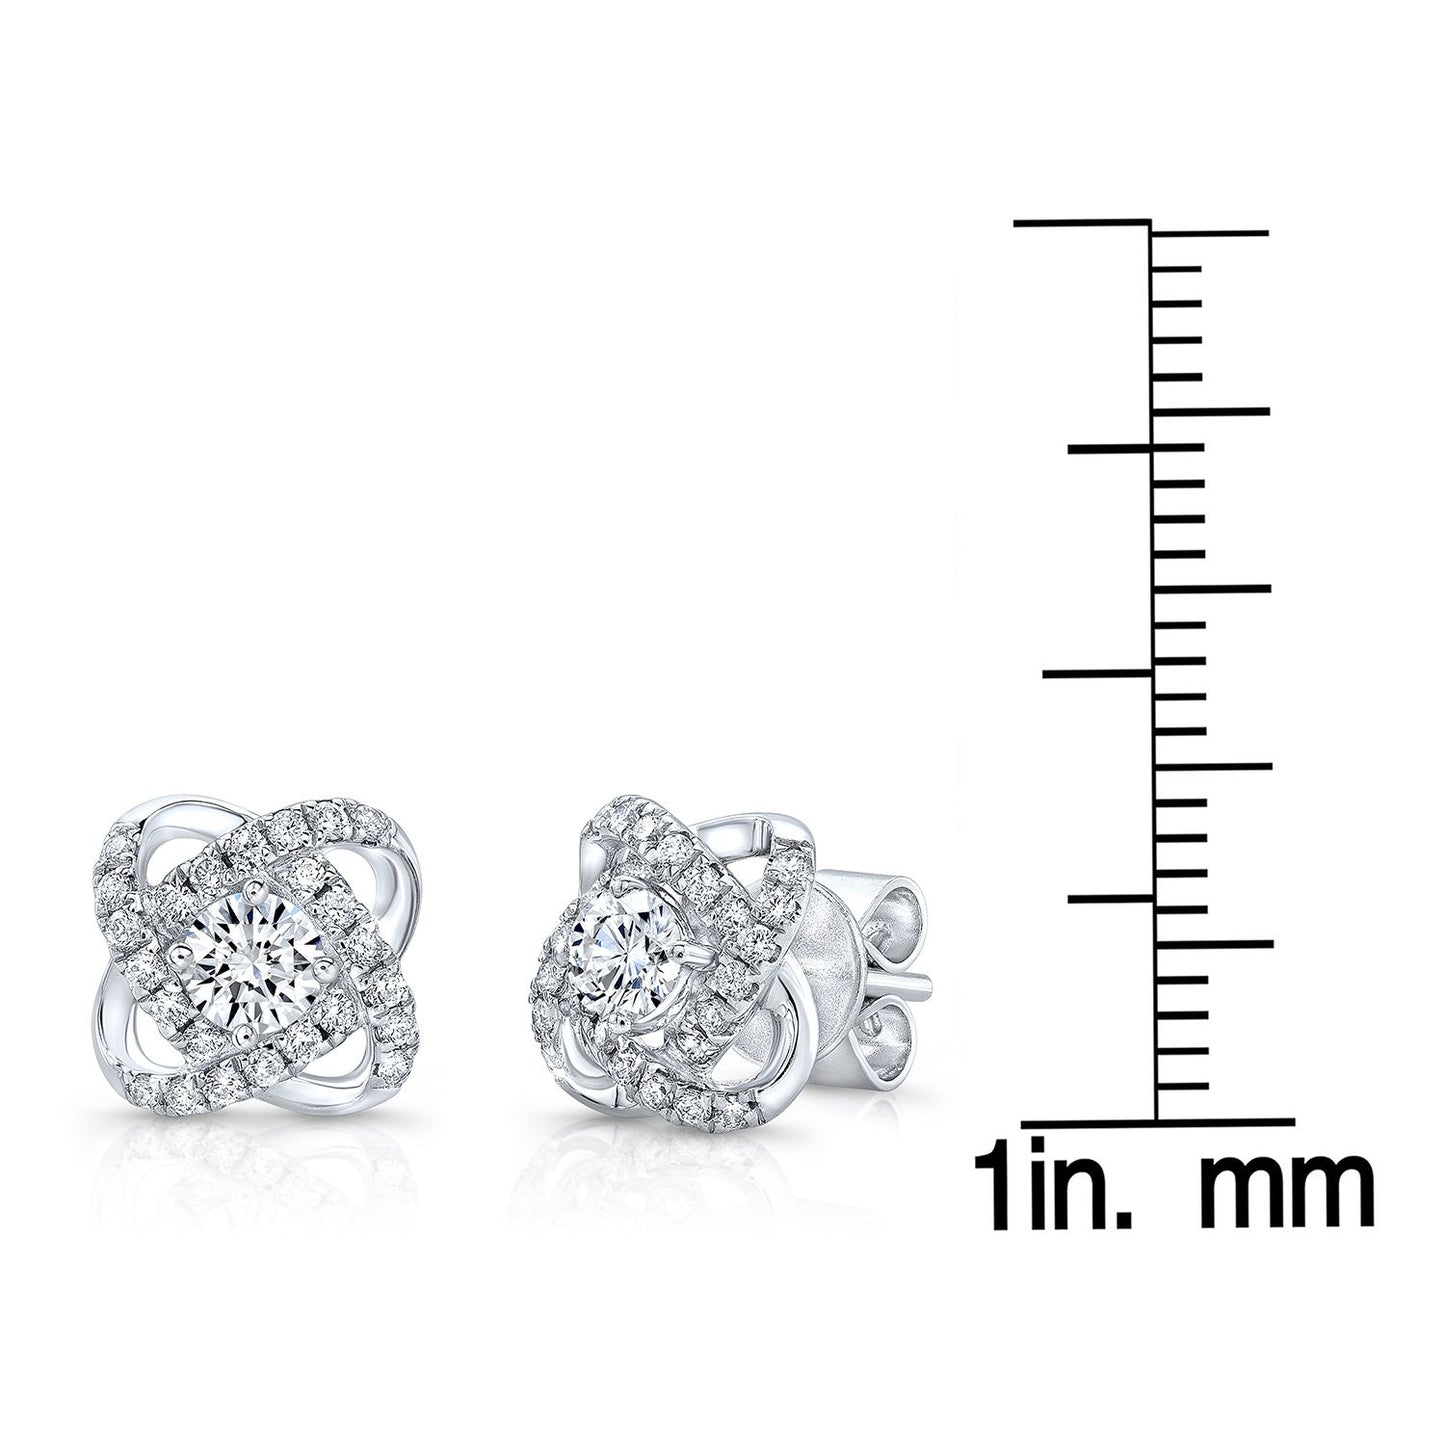 Diamond Pave Cross Knot Earrings With Round Centers In 14k White Gold